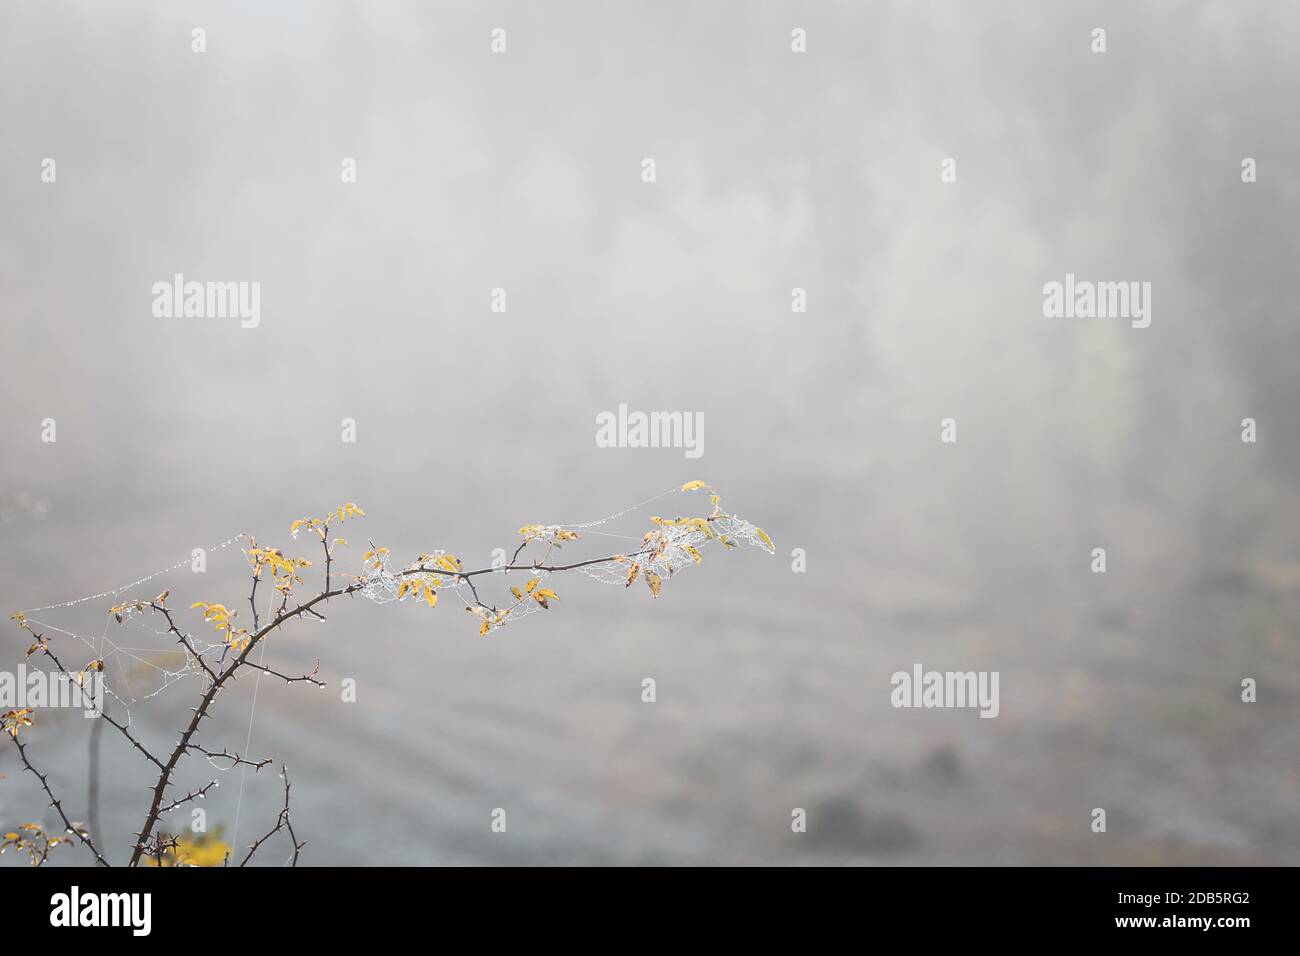 Spiky shrub branch covered in spider web and dew against hazy autumnal background Stock Photo